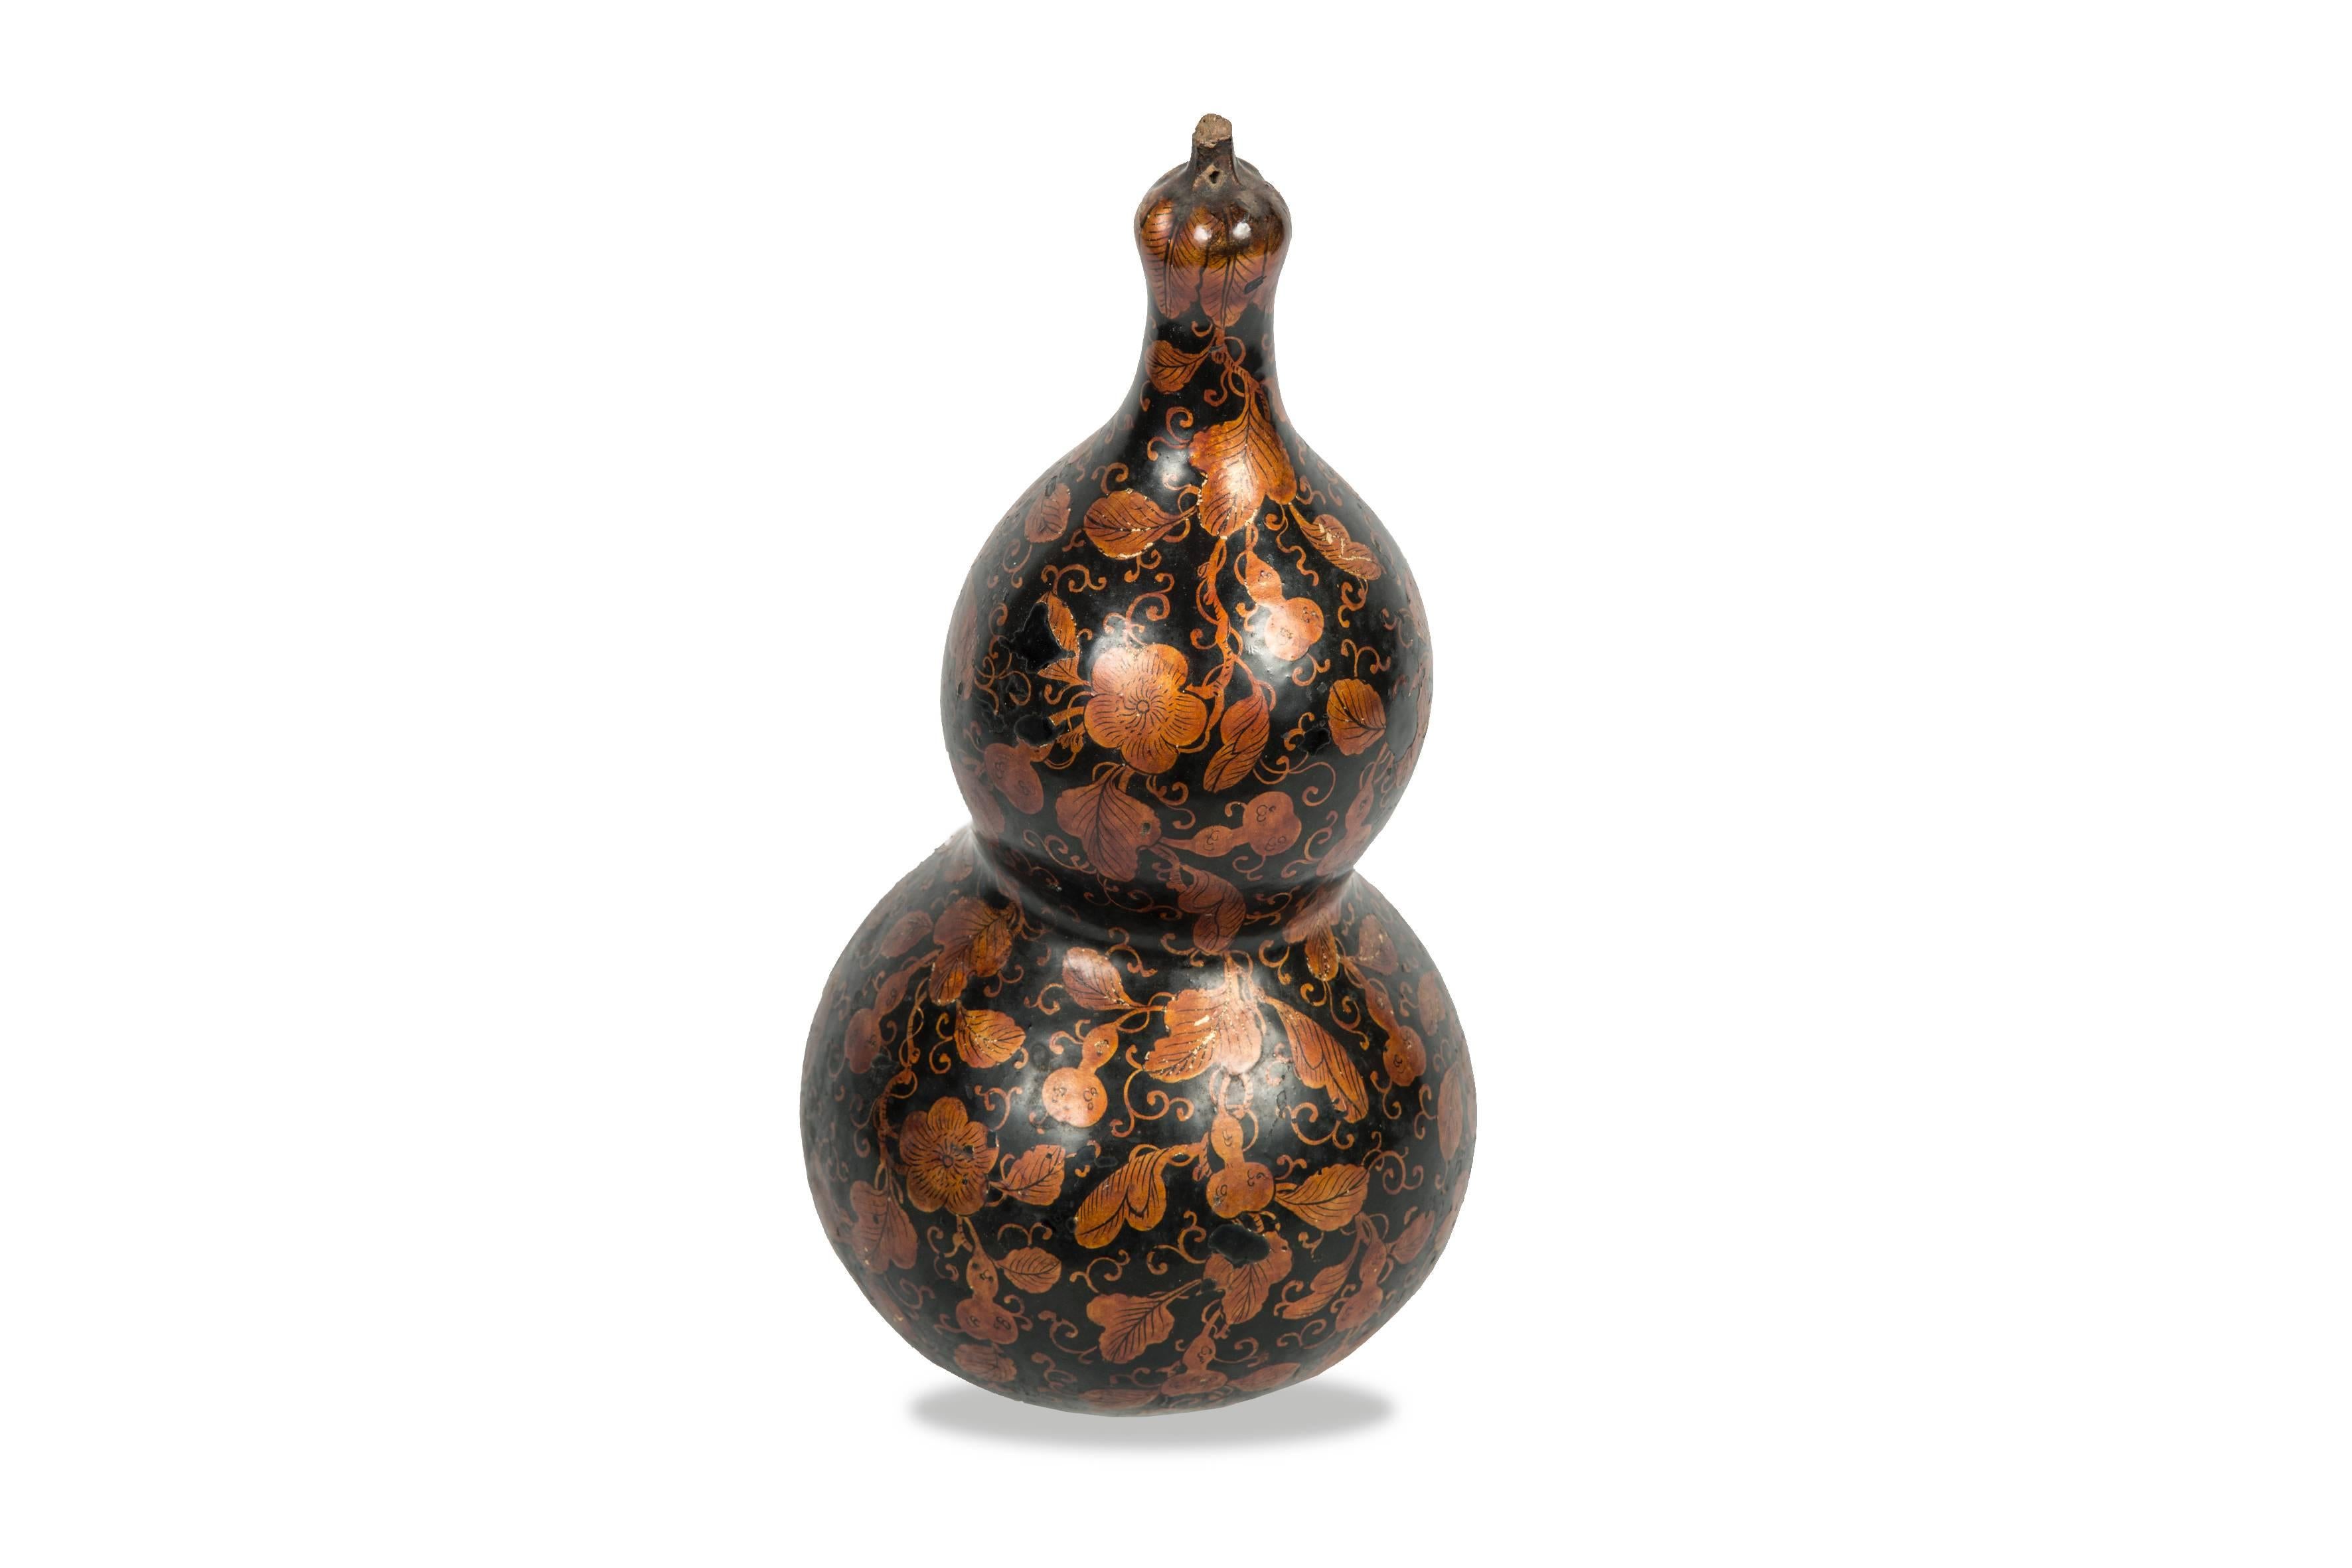 Calabash with a polychrome decor of leaves and calabash gourd.
Japan - Meiji (1868-1912).
Measures: Height 28 cm, diameter 15 cm.

 Known as hyotan in Japan, the earliest records of gourd can be found in Nihongi, the Chronicles of Japan